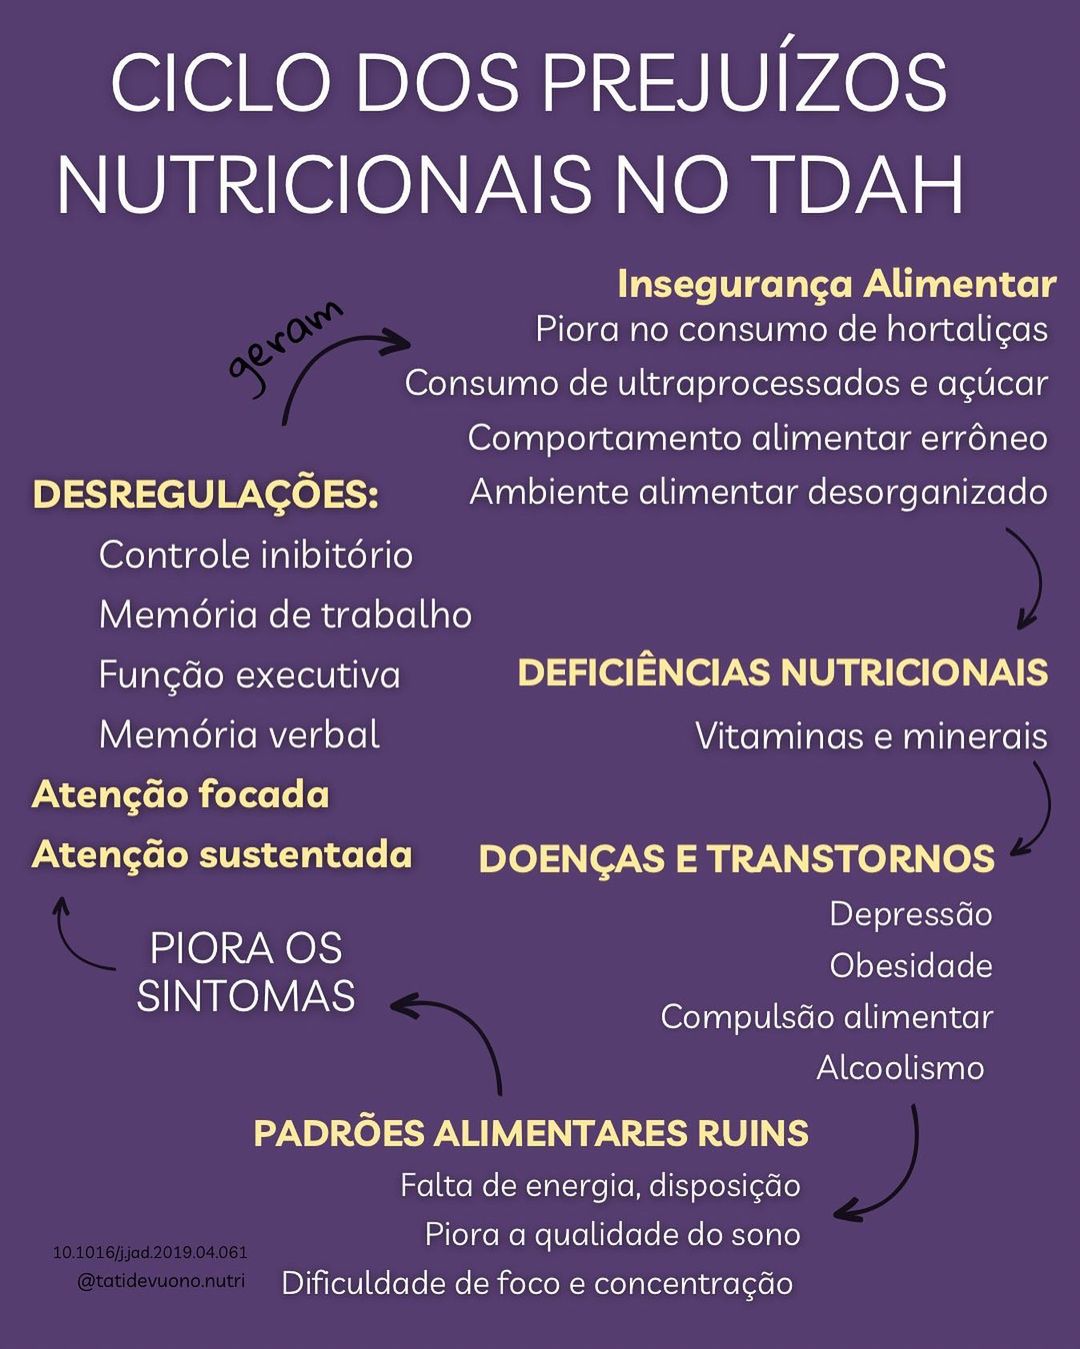 One of the top publications of @tatidevuono.nutri which has 93 likes and 7 comments